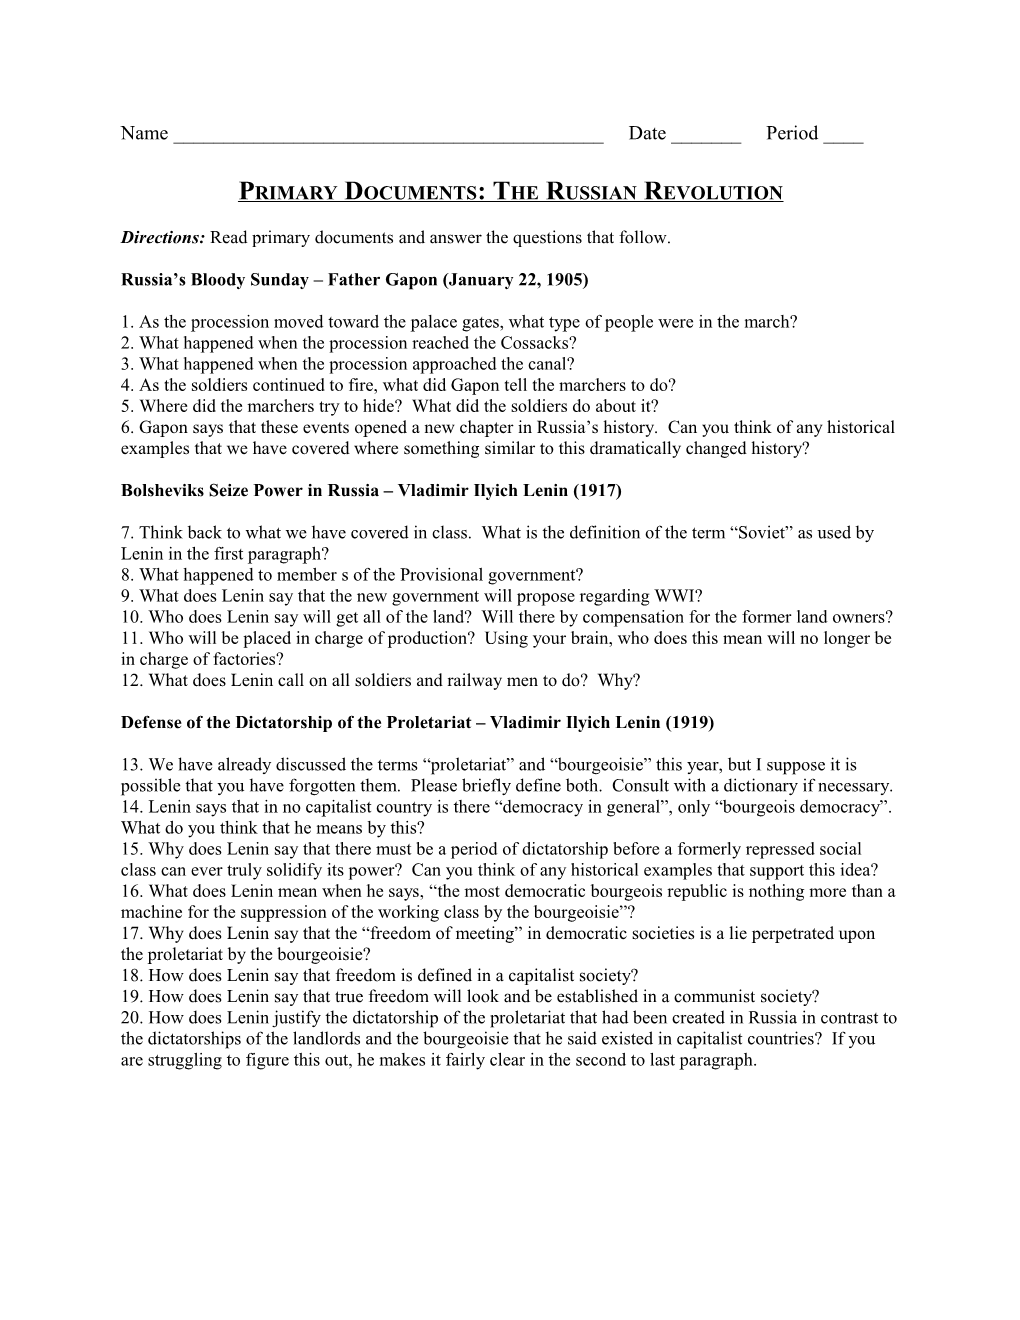 Primary Documents: the Russian Revolution